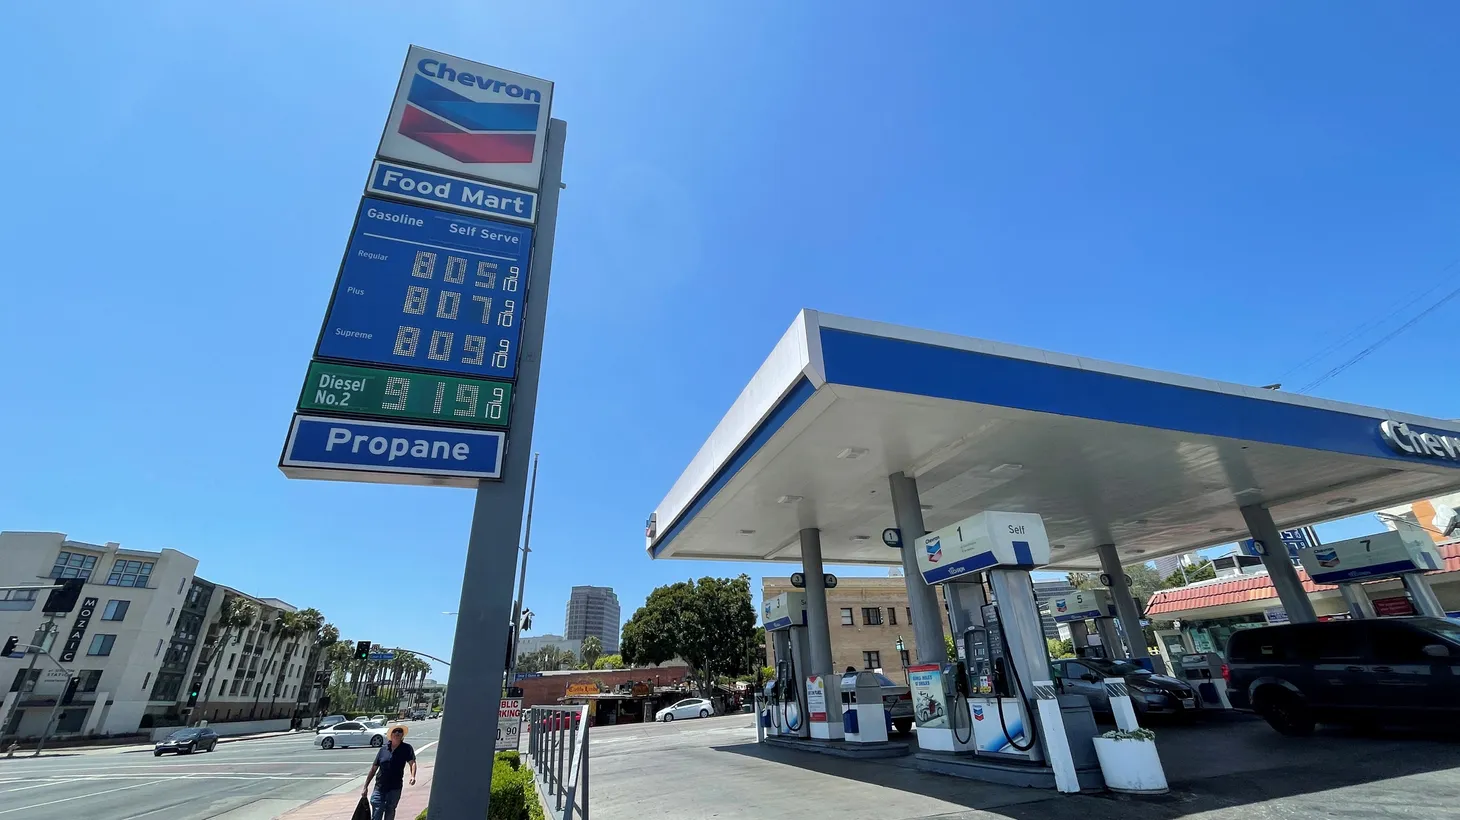 Gas prices exceed $8.00 per gallon at a Chevron station in Los Angeles, California, May 30, 2022.